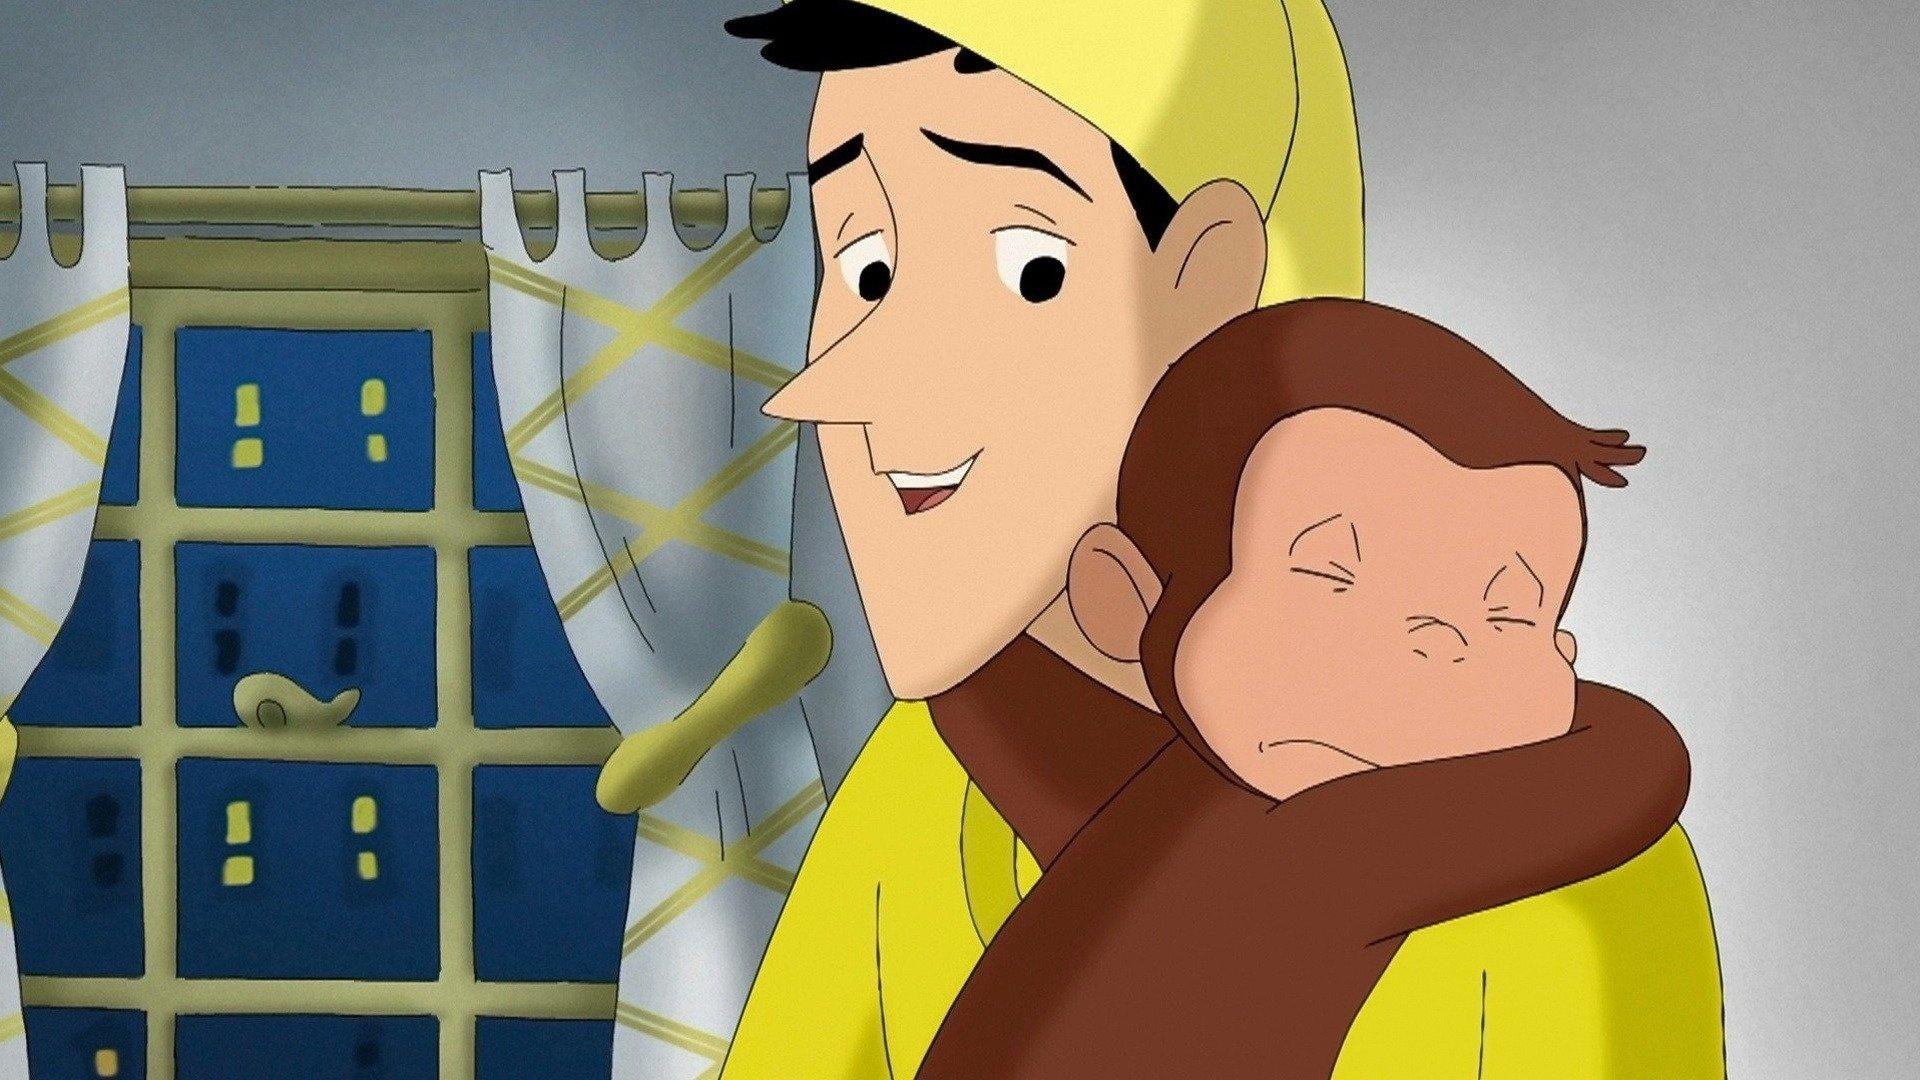 What Type Of Monkey Is Curious George? - Online Field Guide